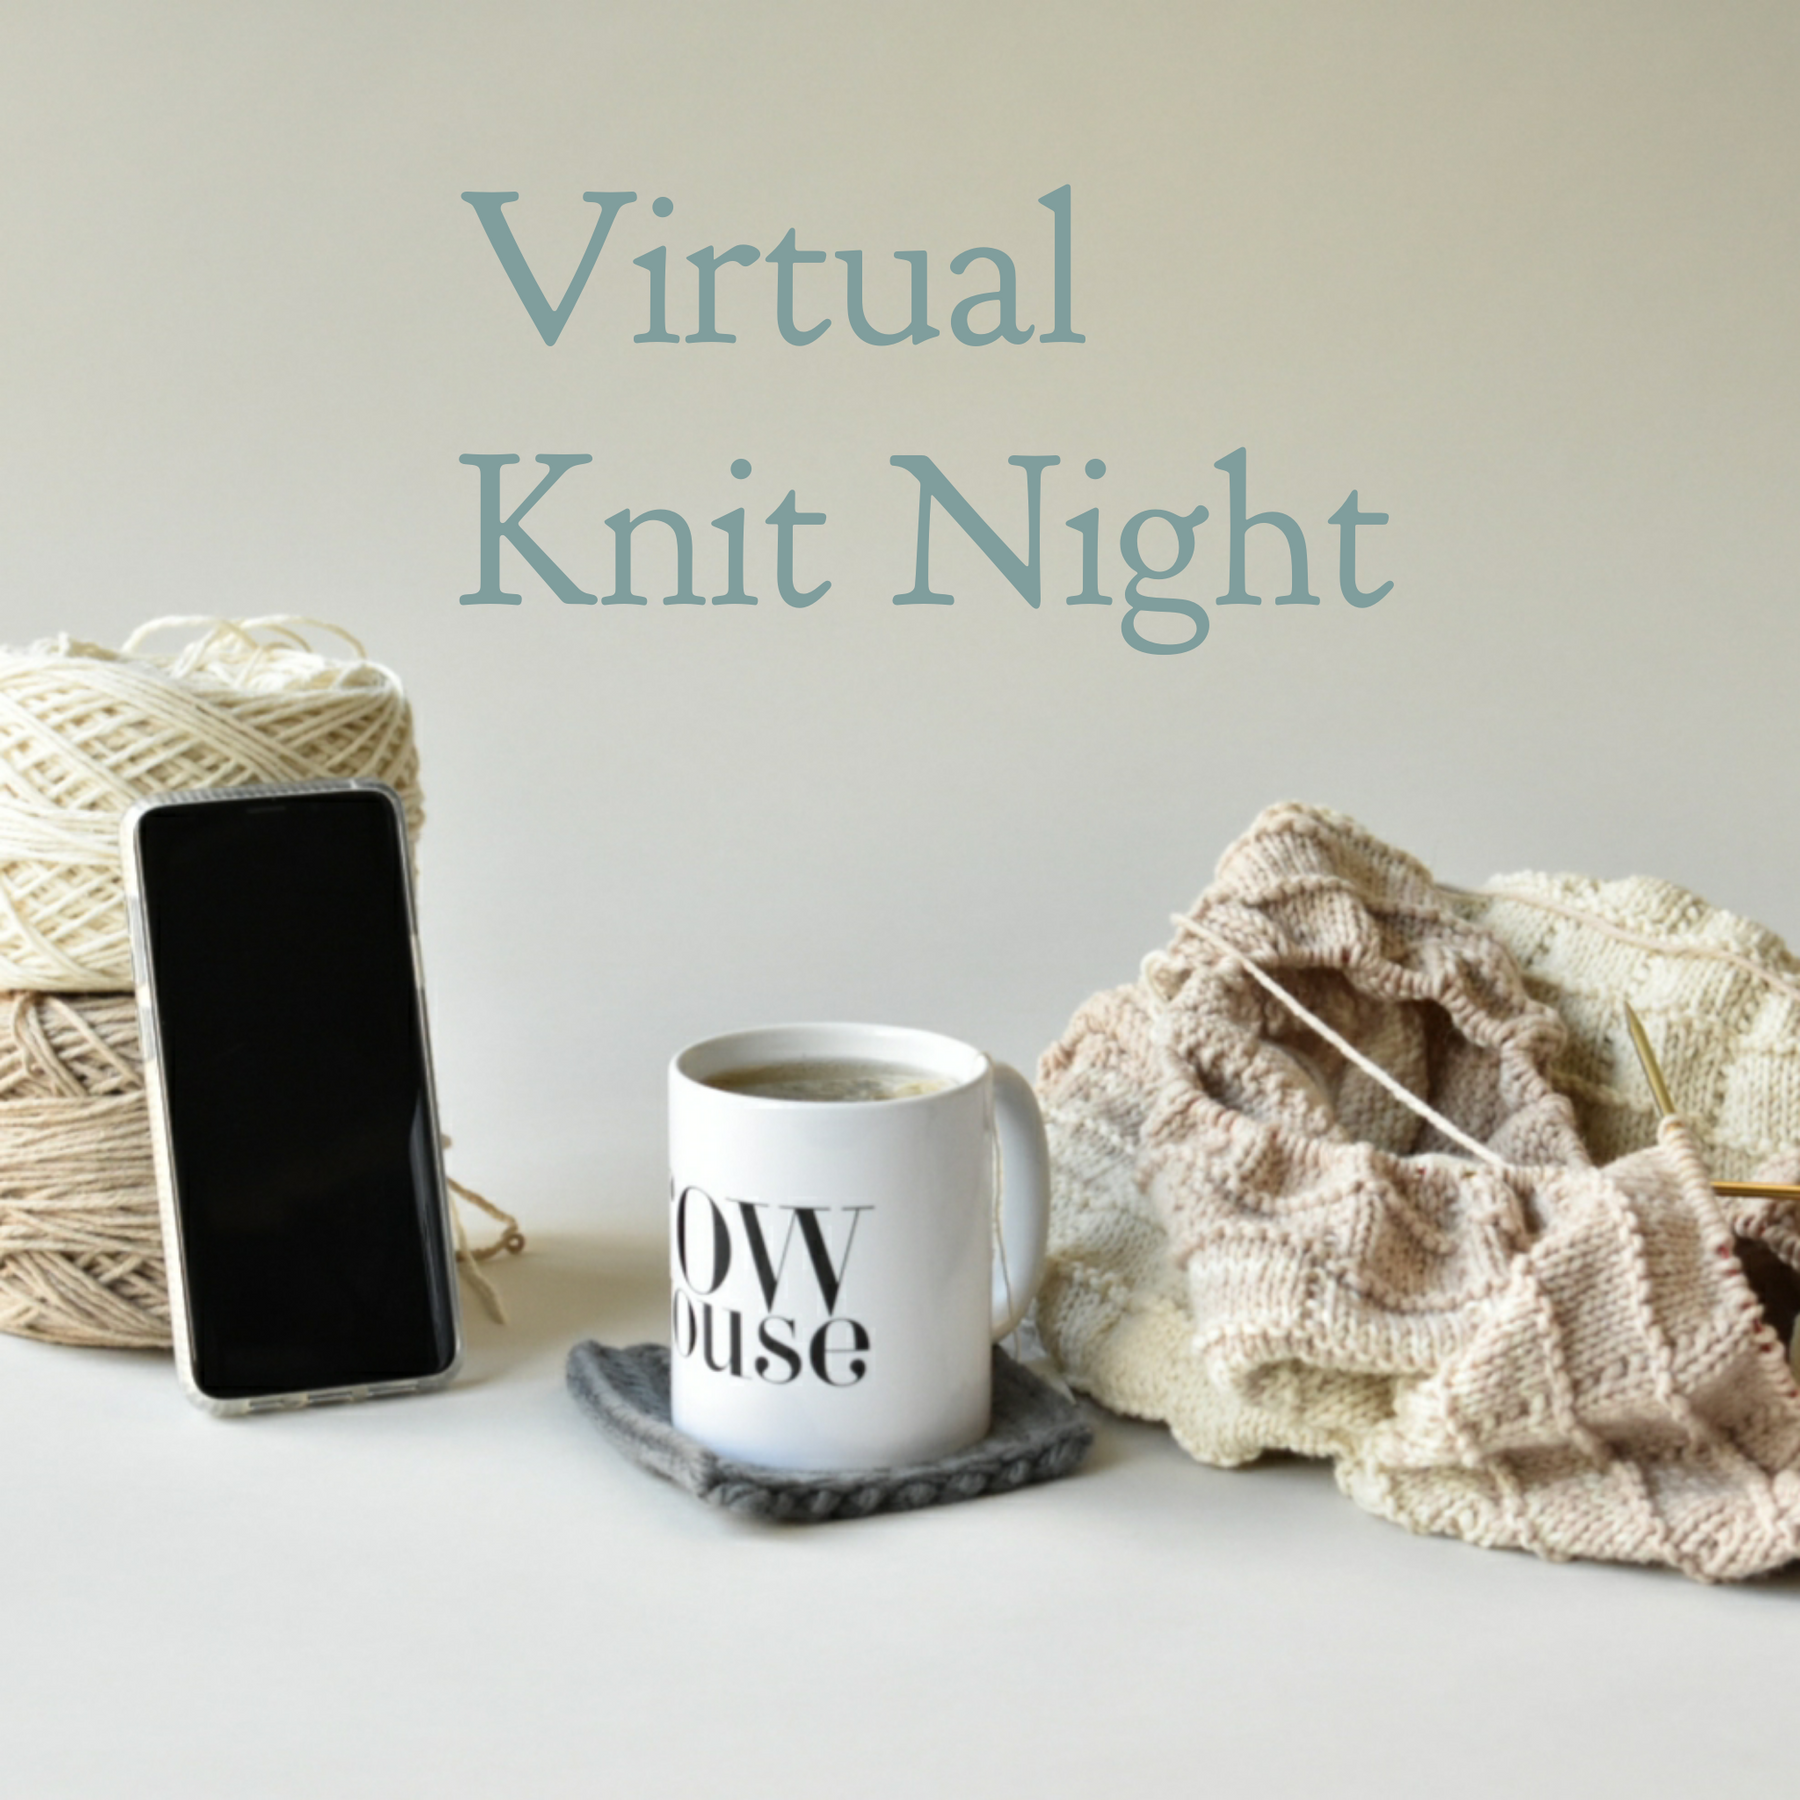 Join us for a Virtual Knit Night (all fiber artists are welcome!) on March 19th!